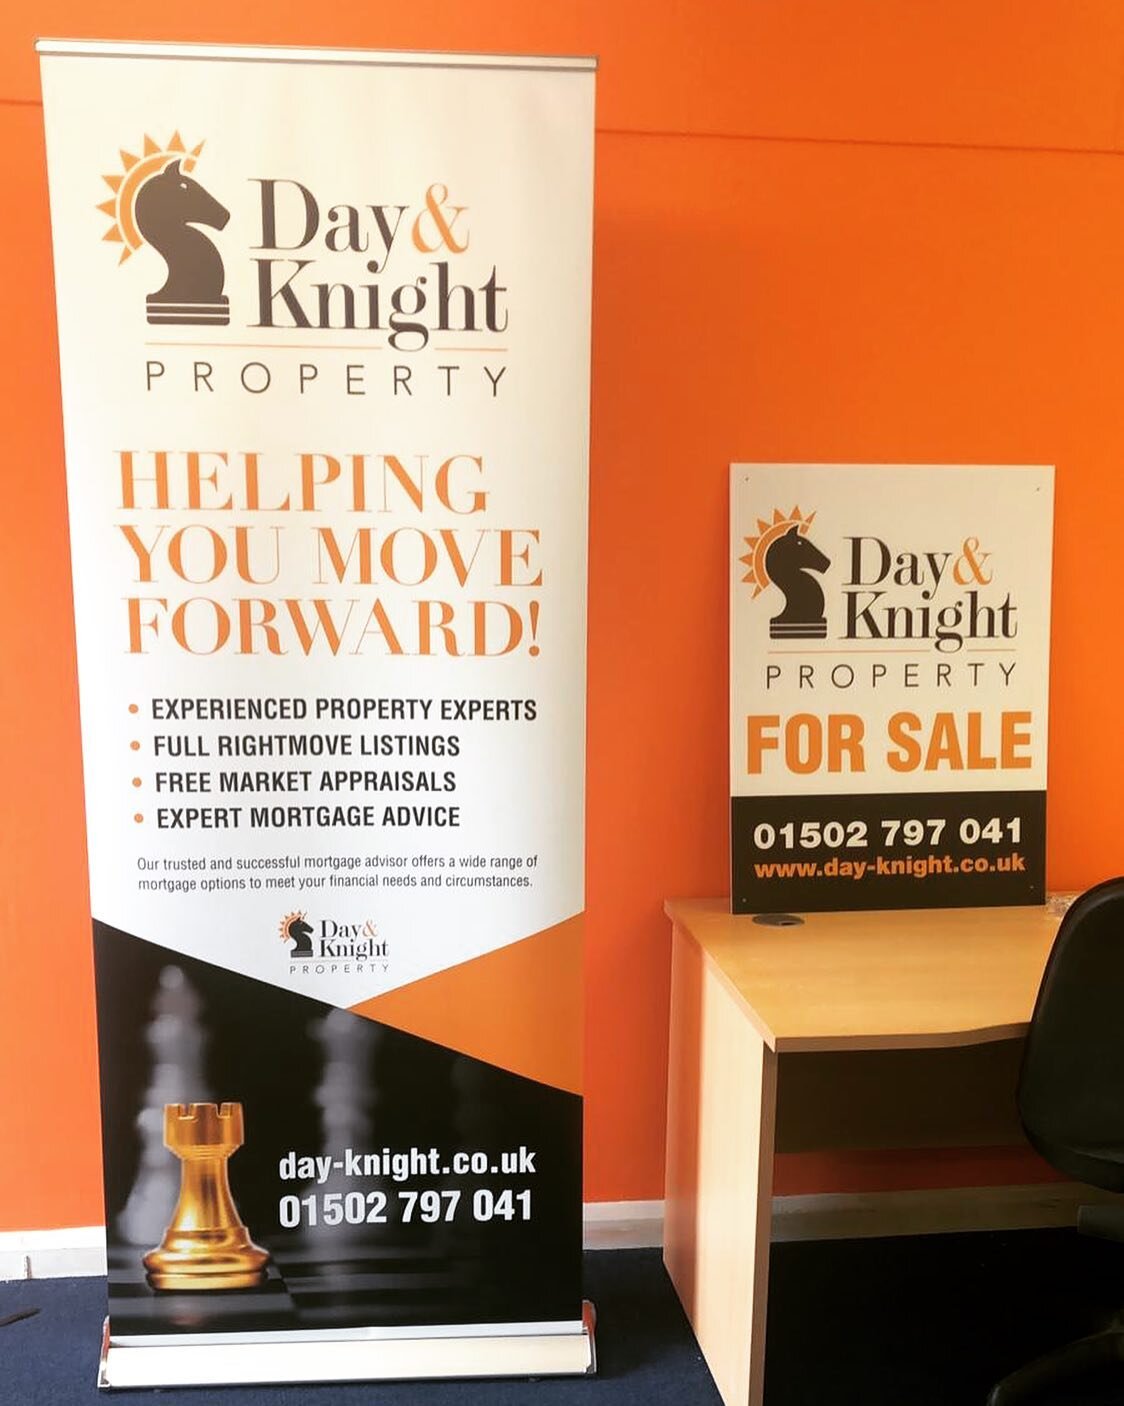 Couple of bits designed for @dayandknightproperty 
Estate agents in lowestoft with expert mortgage advice from @day_knight_financial_services 

#design #graphicdesign #graphicdesigner #brandingidentity #banner #photoshop #indesign #illustrator #adobe